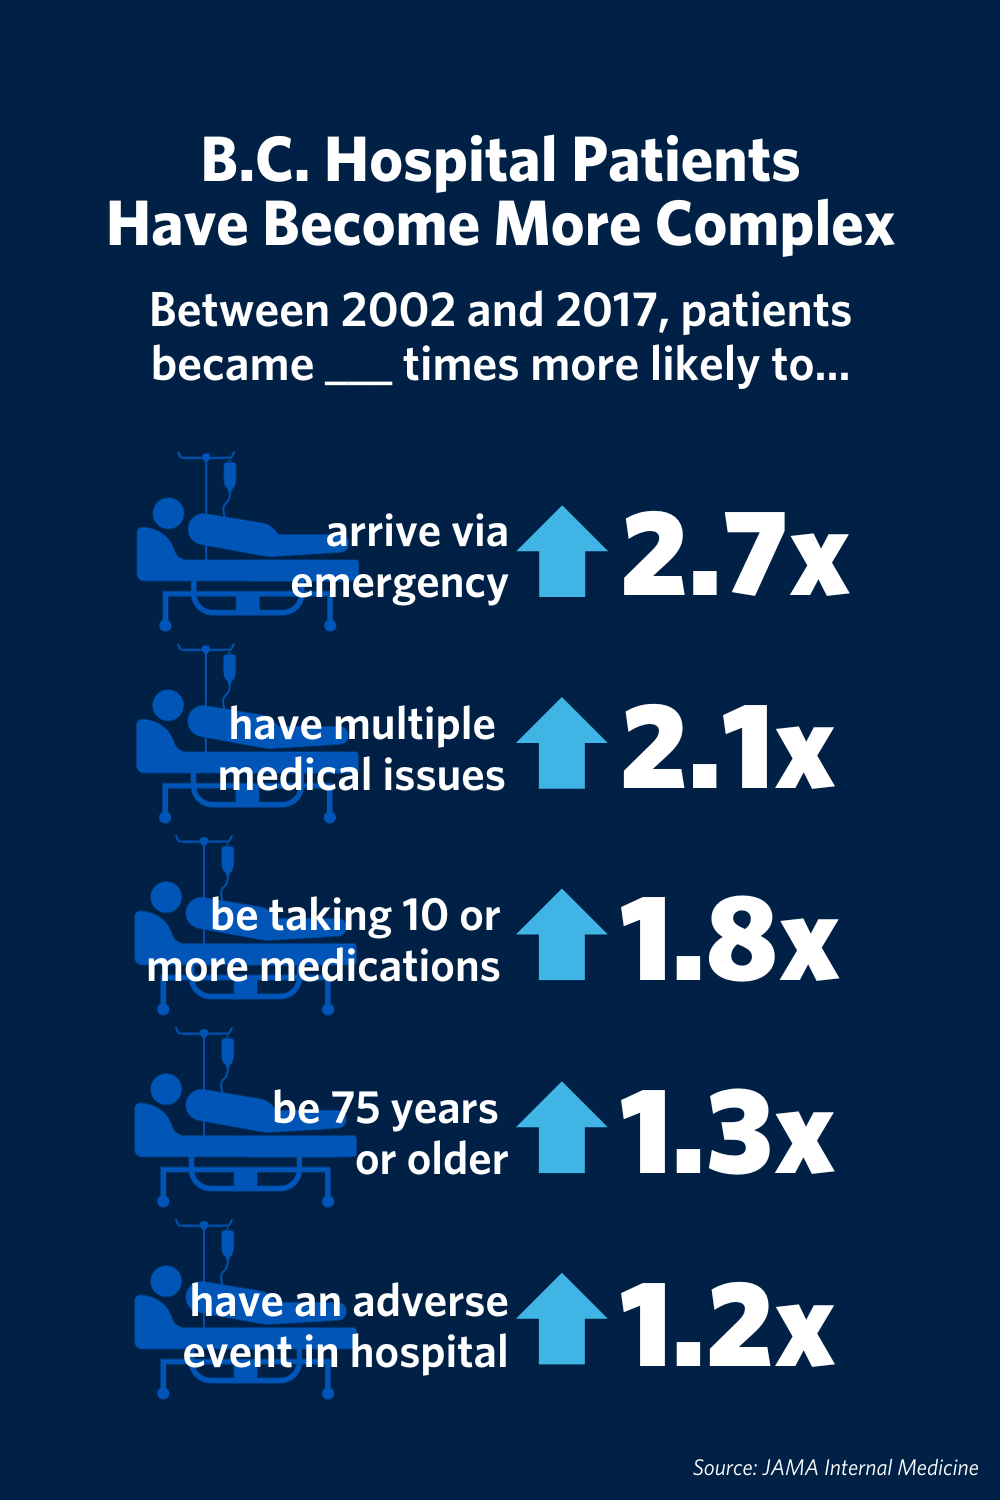 Infographic showing "B.C. hospital patients have become more complex." Subheader reads: In 2017 vs. 2022, patients were _ times more likely to... 2.7x arrive via emergency. 2.1x more have multiple medical issues. 1.8x more to be taking 10 or more medications 1.3x be 75 years or older.